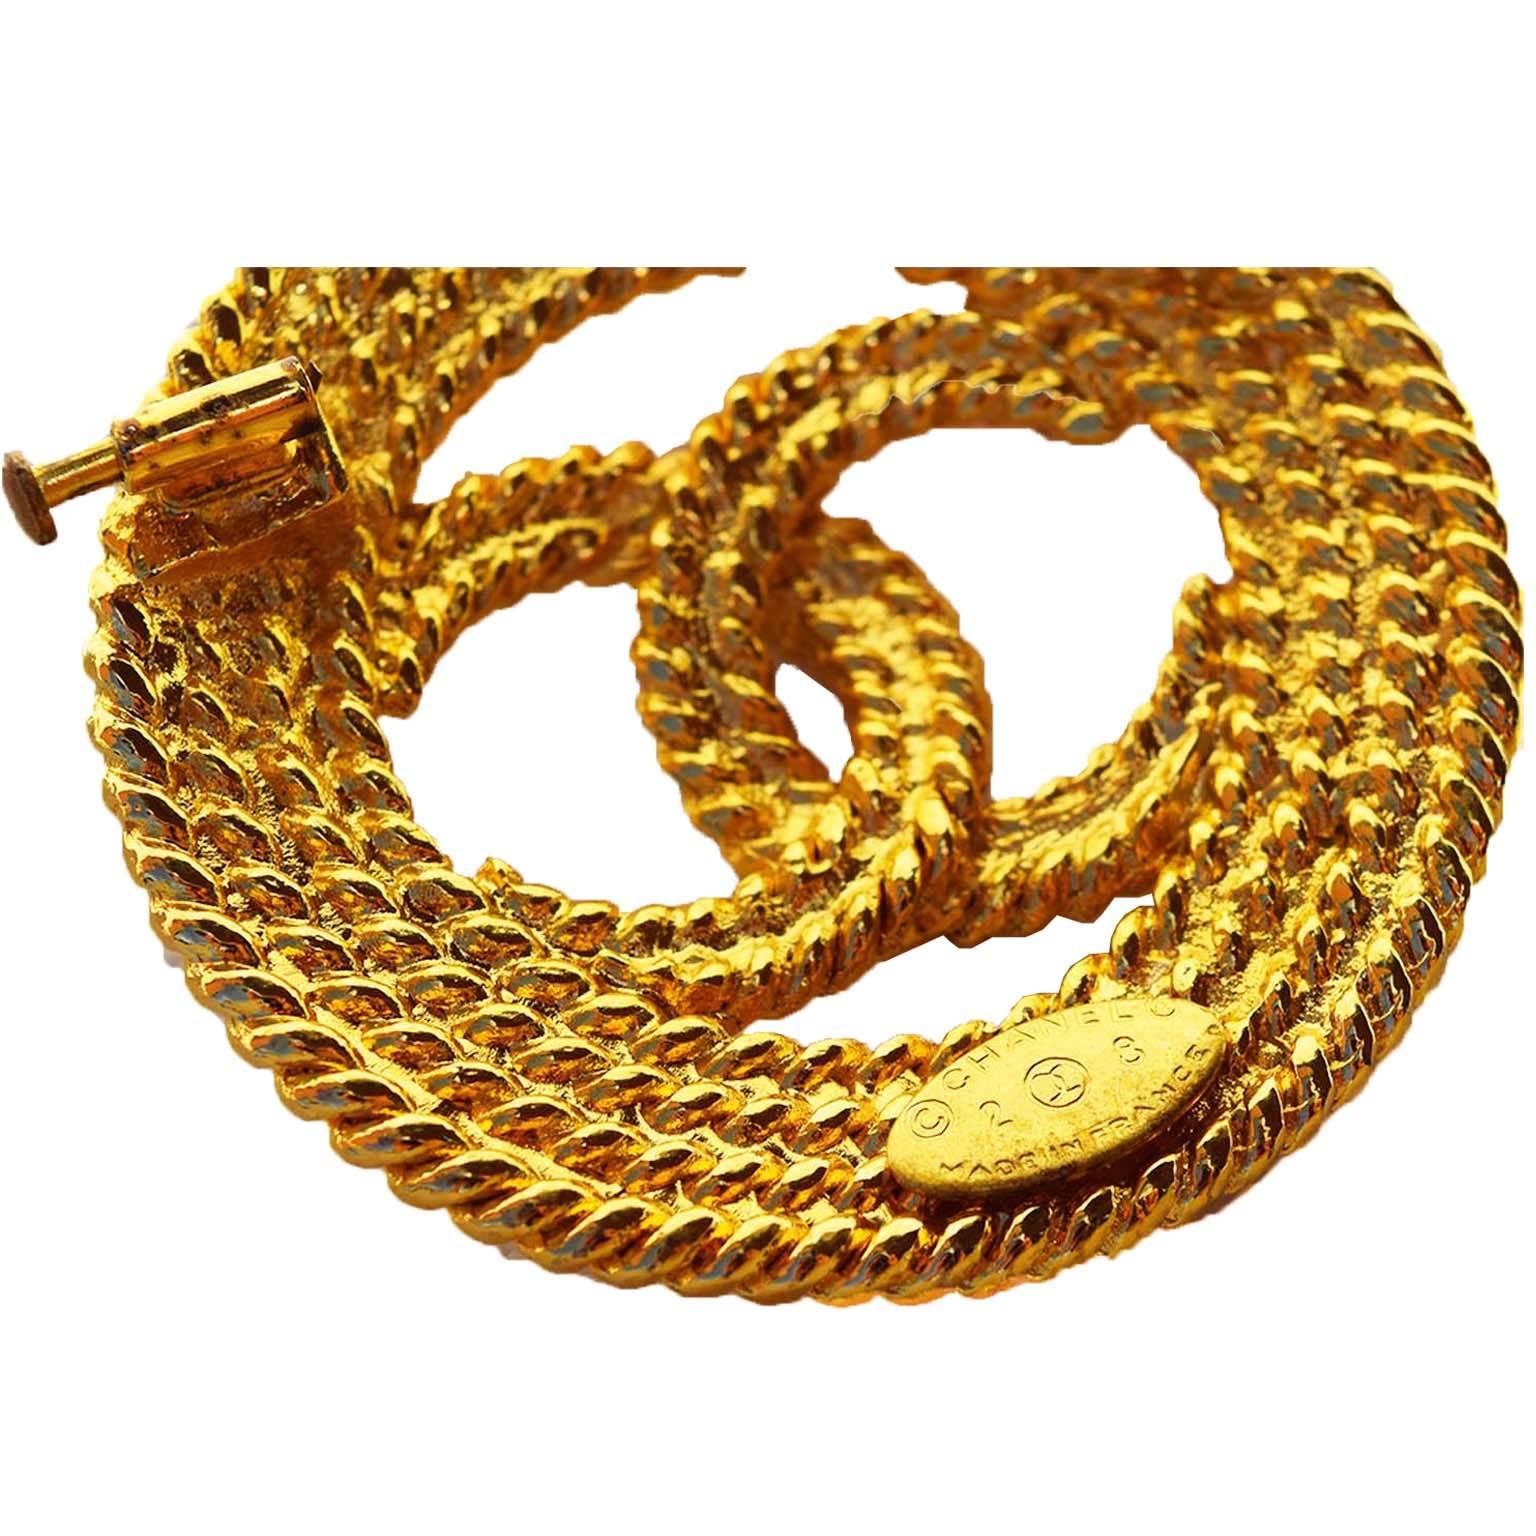 Chanel vintage rope CC logo brooch. Shiny goldtone textured rope design. Collection 28 (1991) designed by Victoire de Castellane, who was hired by Lagerfeld to oversee the design of Chanel's costume jewellery.

Details:
Creator: Chanel
Place of